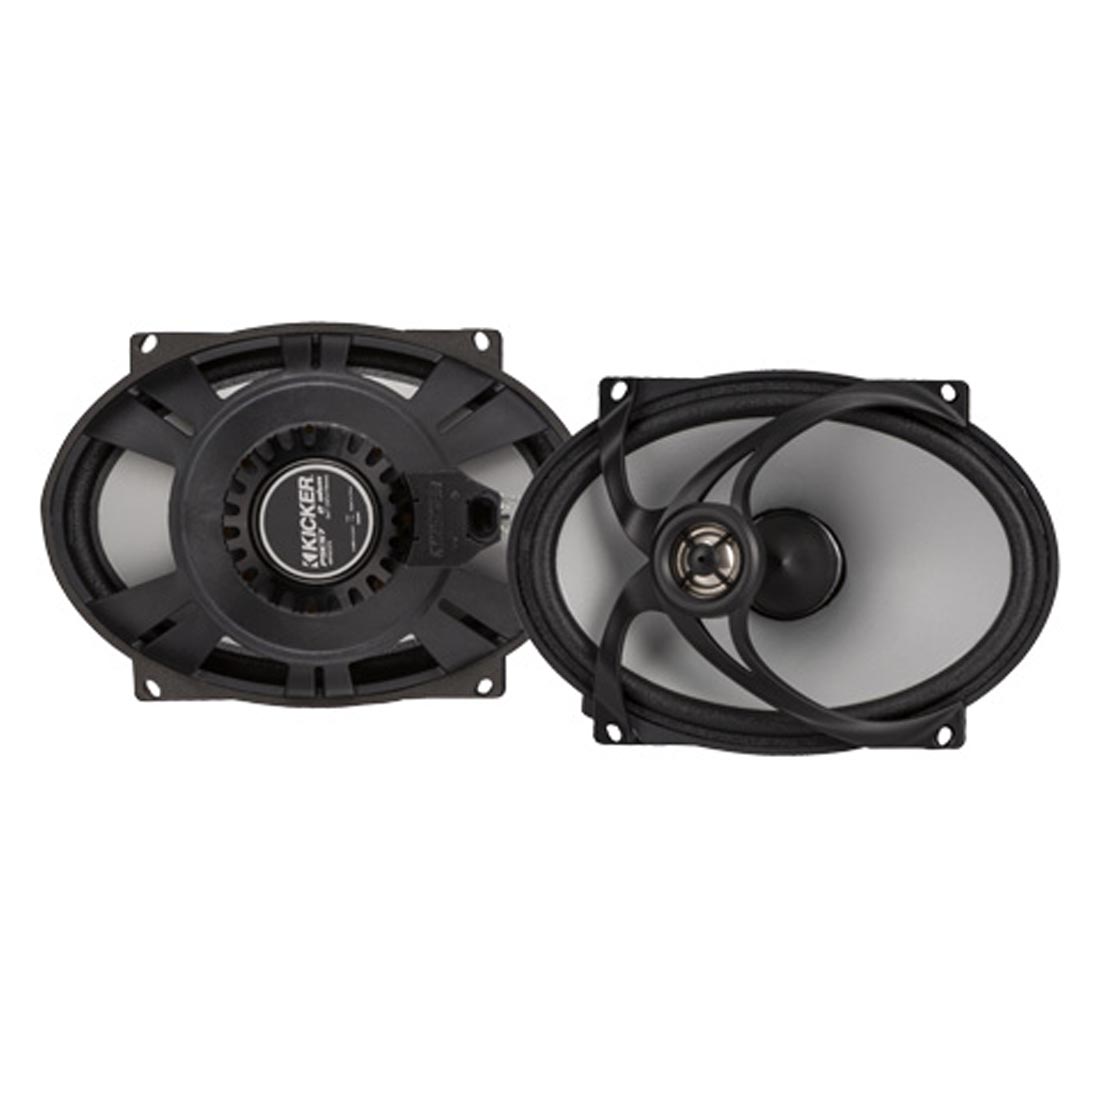 Kicker 48PSC572 5"x7" 2-Way 2-Ohm Coaxial Motorcycle Speakers for Harley Davidson